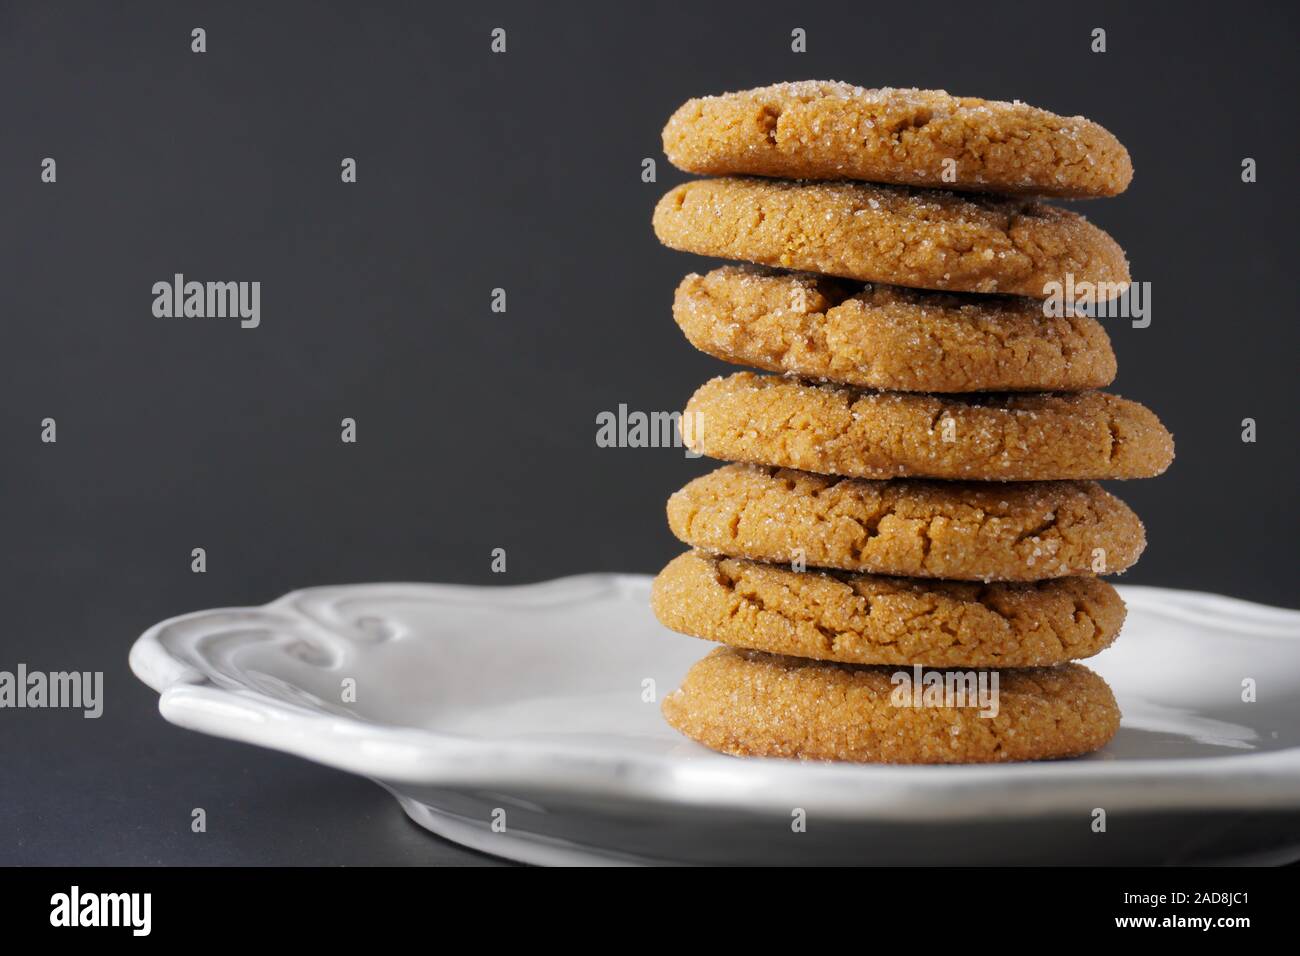 Close-up image of a stack of ginger Christmas cookies on a white plate with a black background; copy space Stock Photo